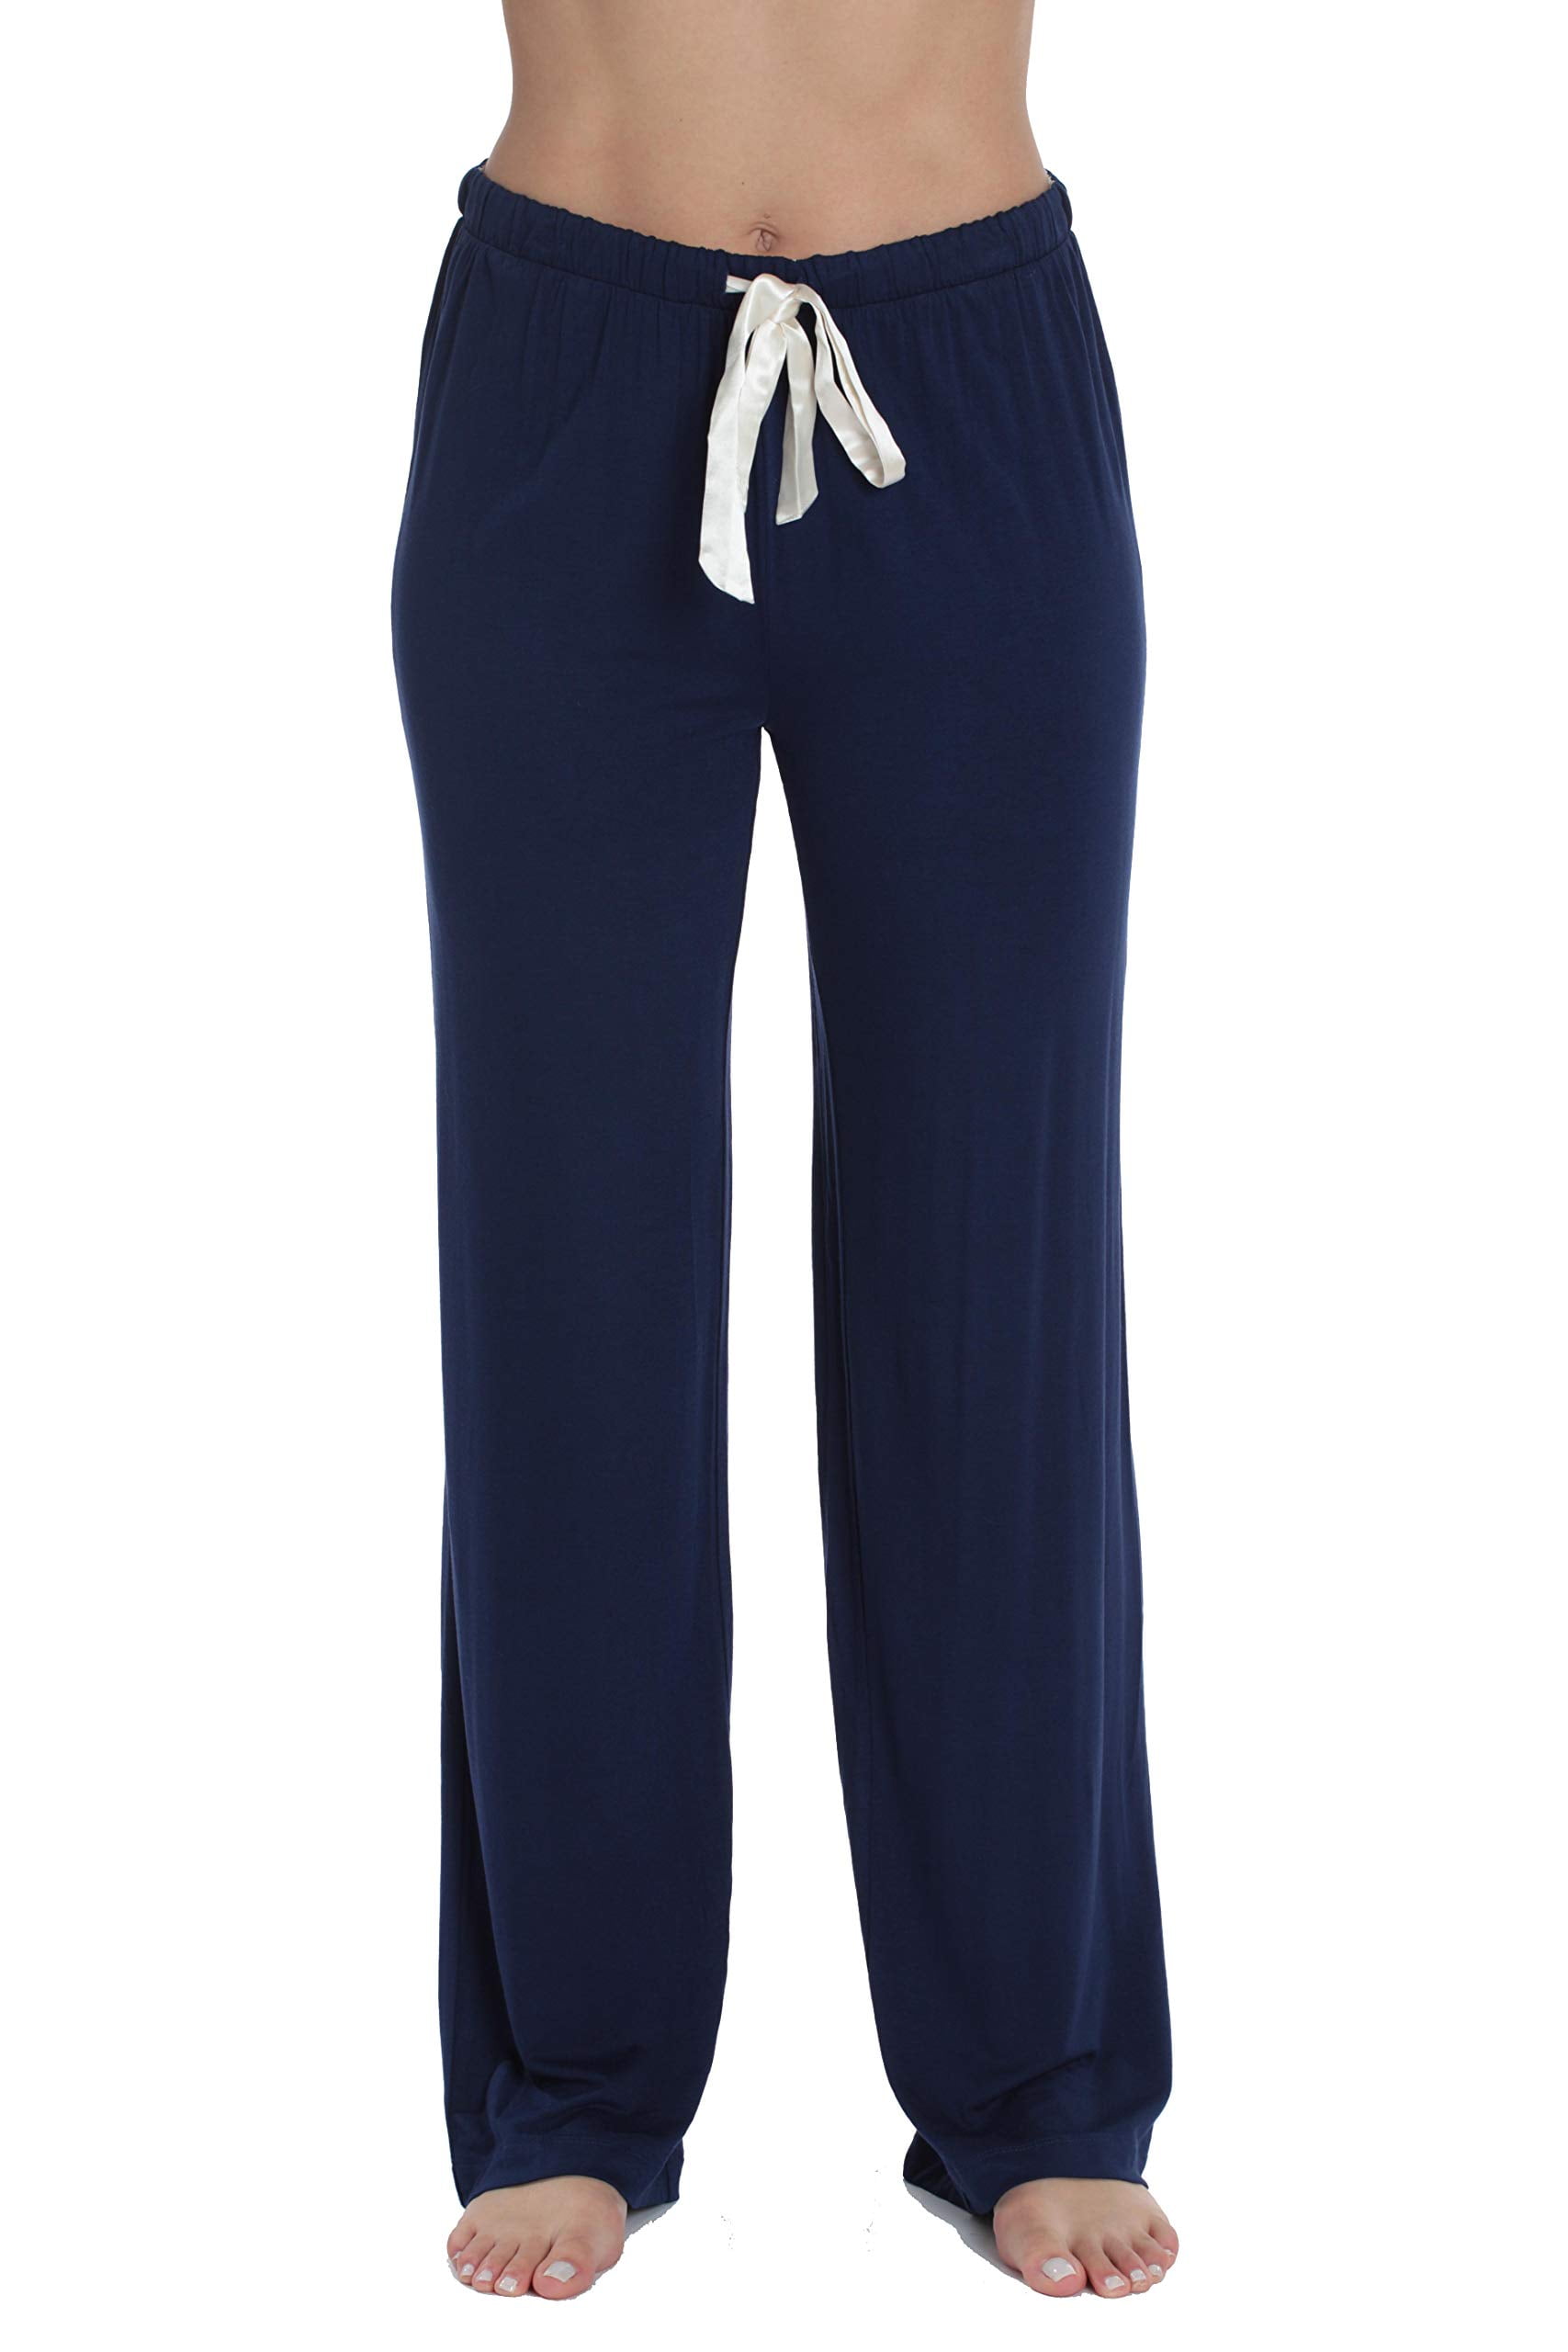 #followme Ultra Soft Solid Stretch Jersey Pajama Pants for Women (Navy With  Cream, Medium)